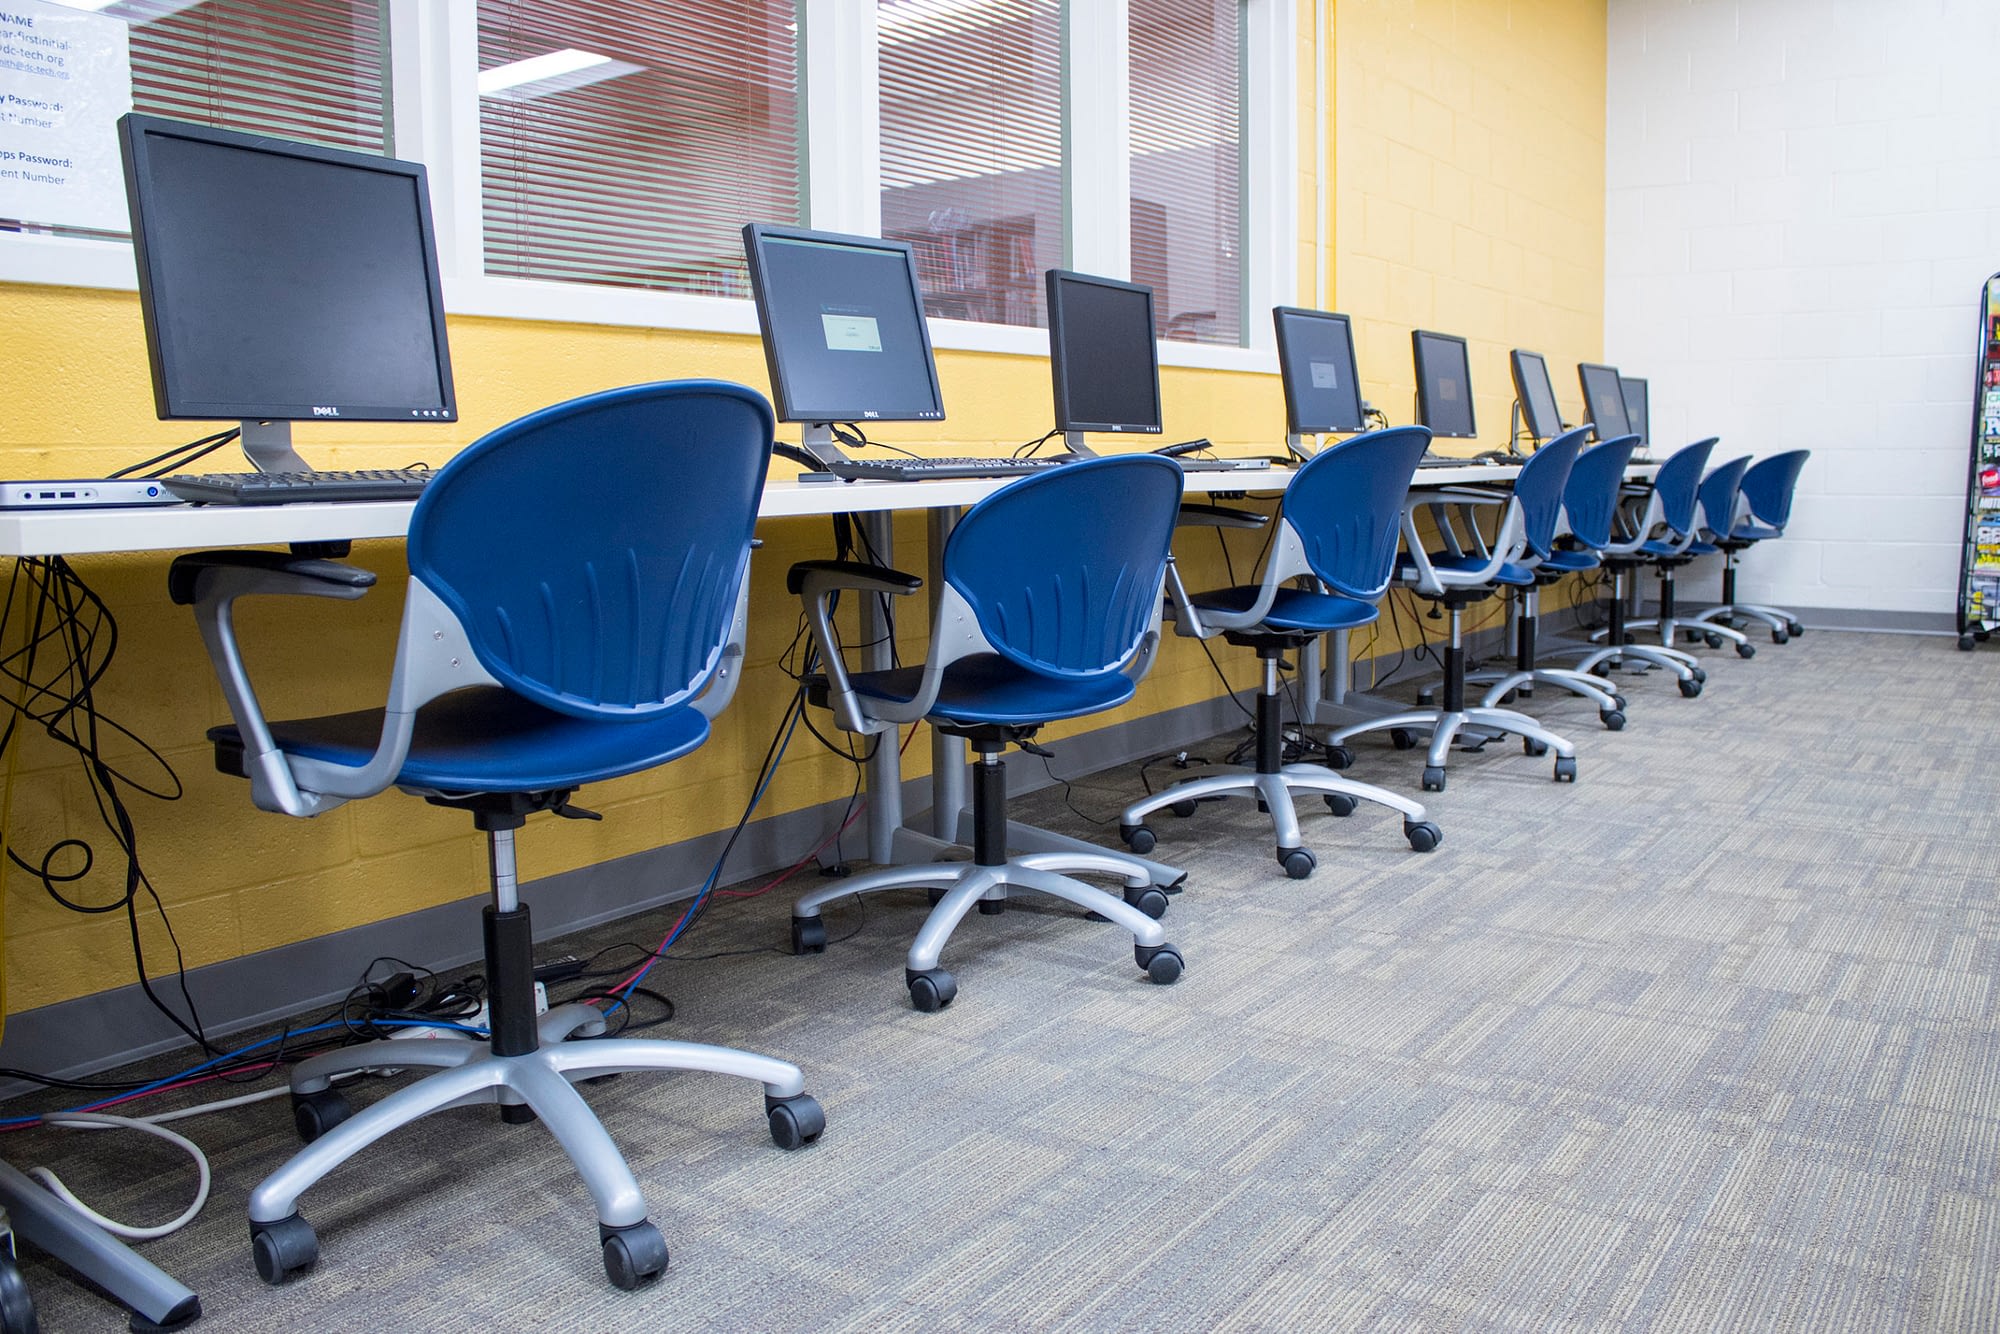 Blue Cinch Chairs and Footings Chairs with Computers